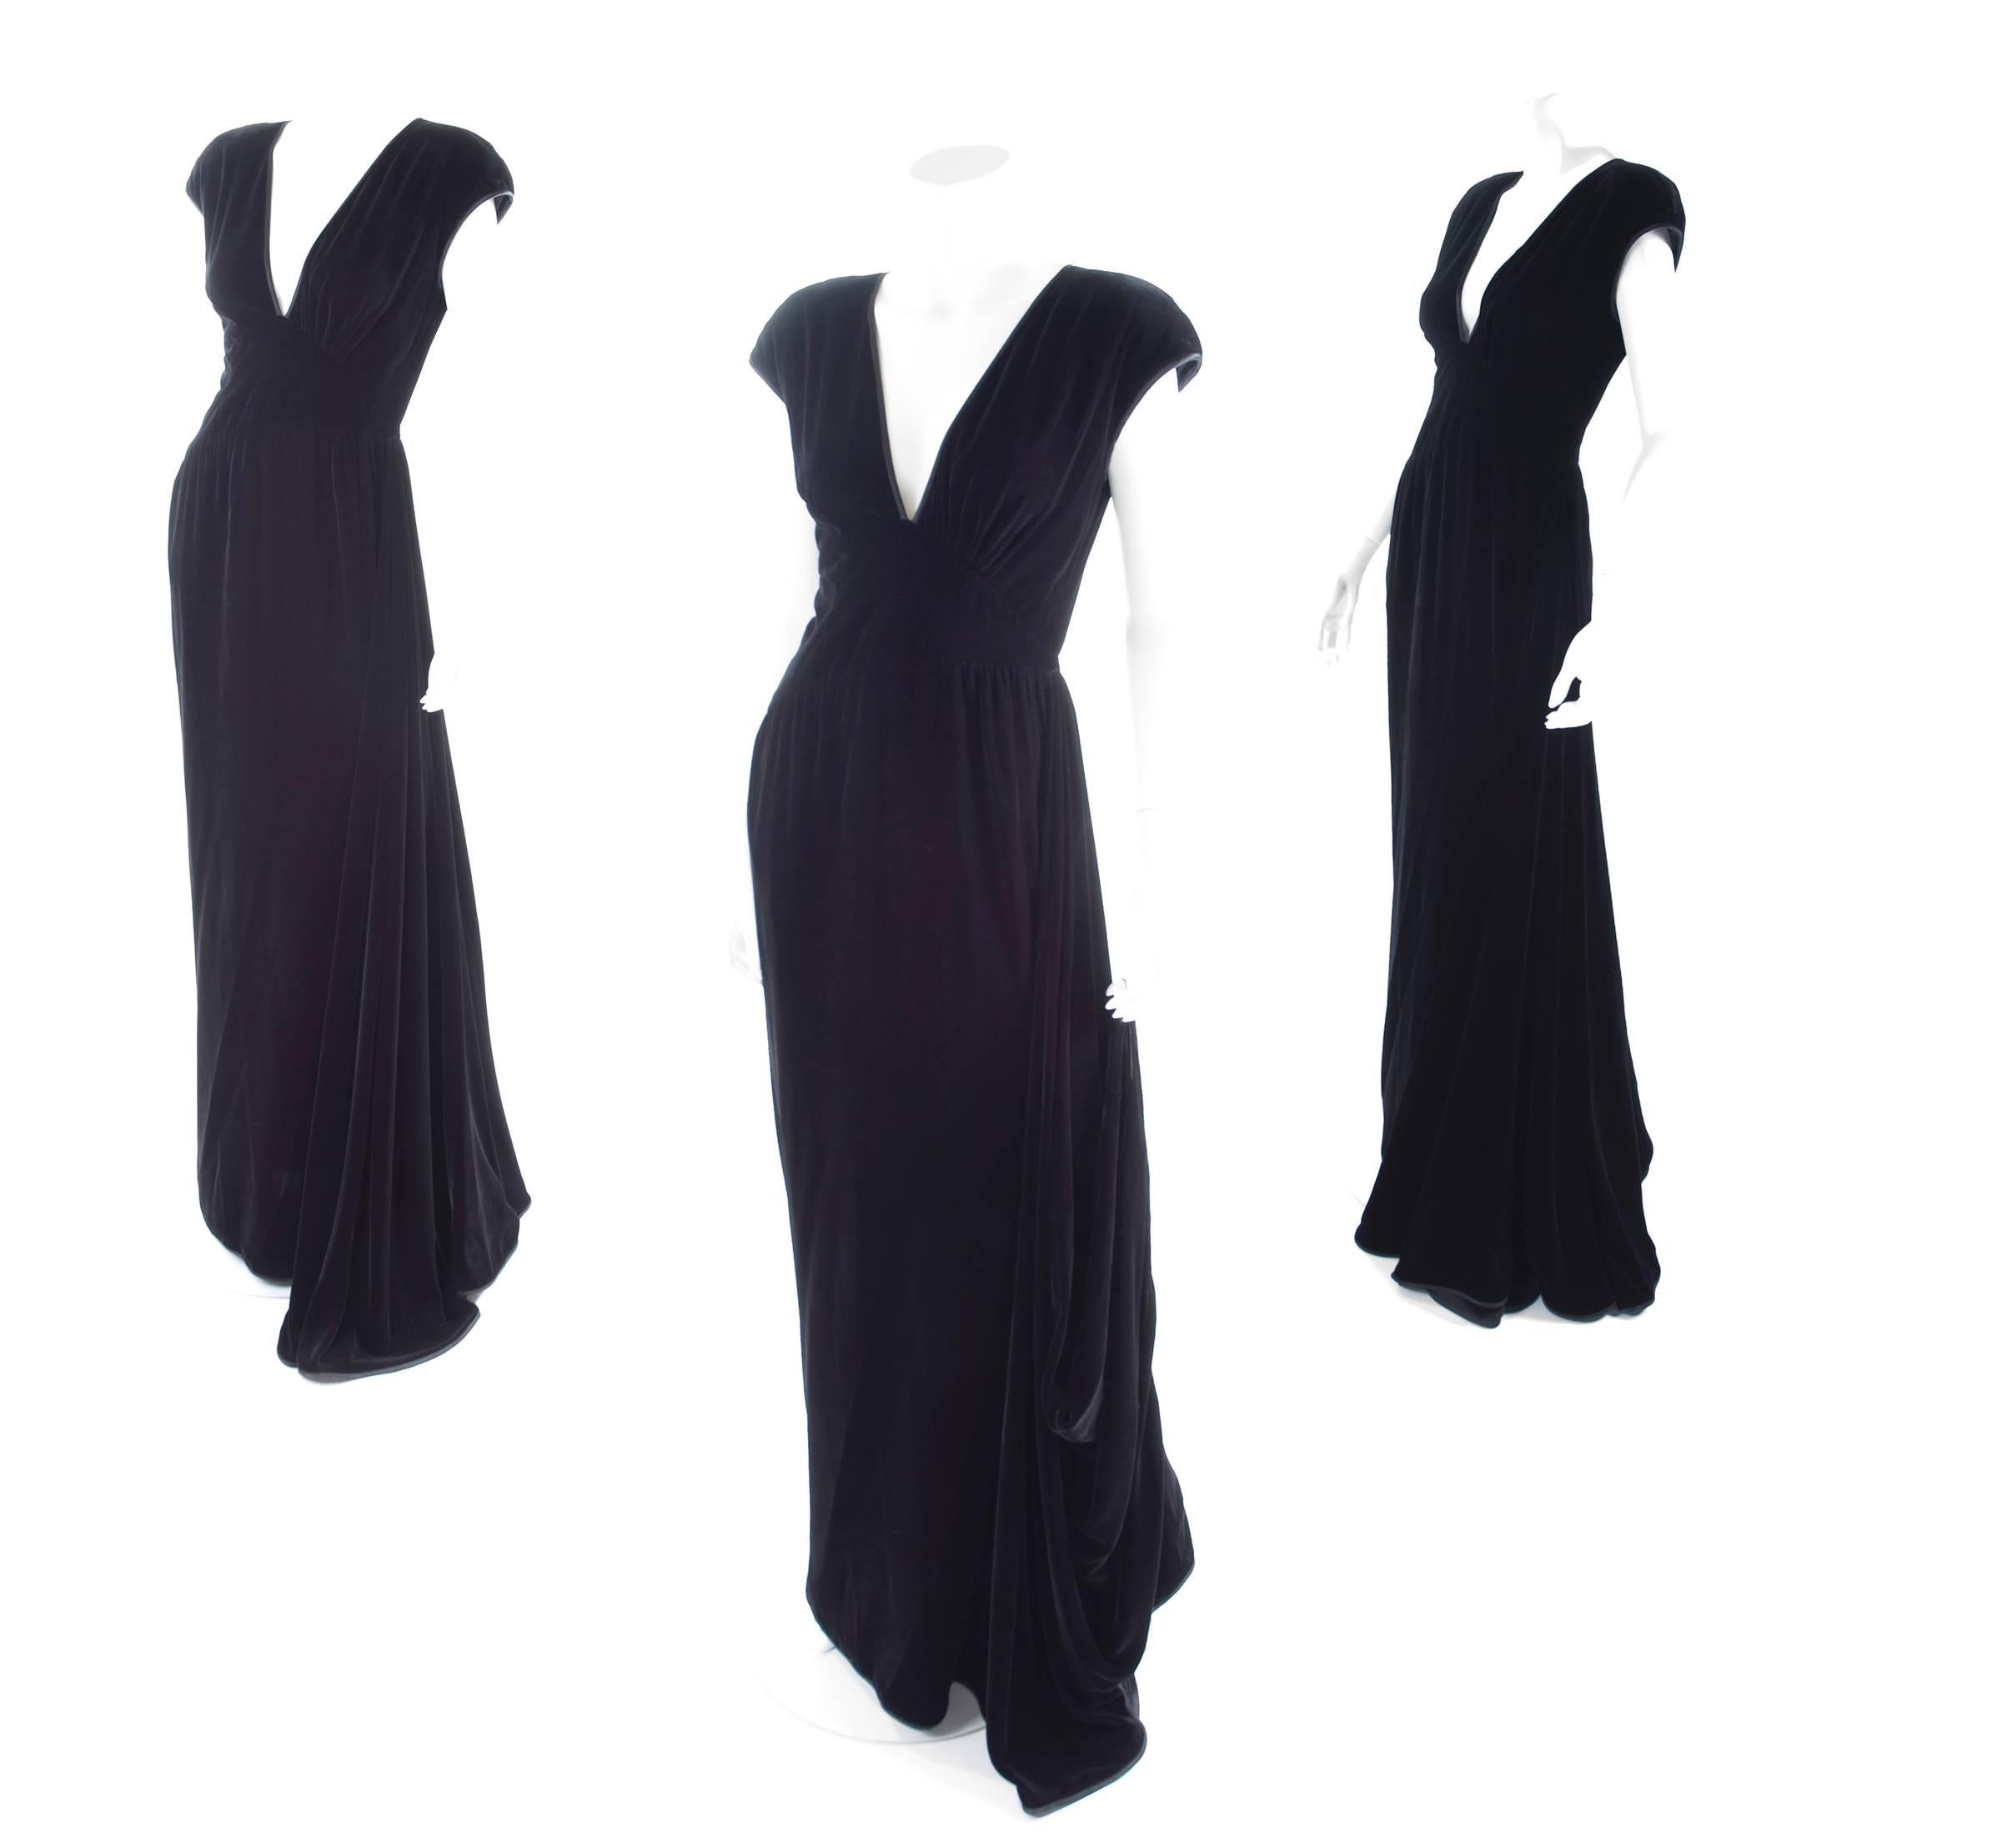 1980 Valentino black velvet evening dress with side train.
Train with finger loop to lift it of the floor.
Excellent condition. 
Size label missing- about US 6
Measurements: 
Length 61 - bust 34 - waist 26- hips 36 inches